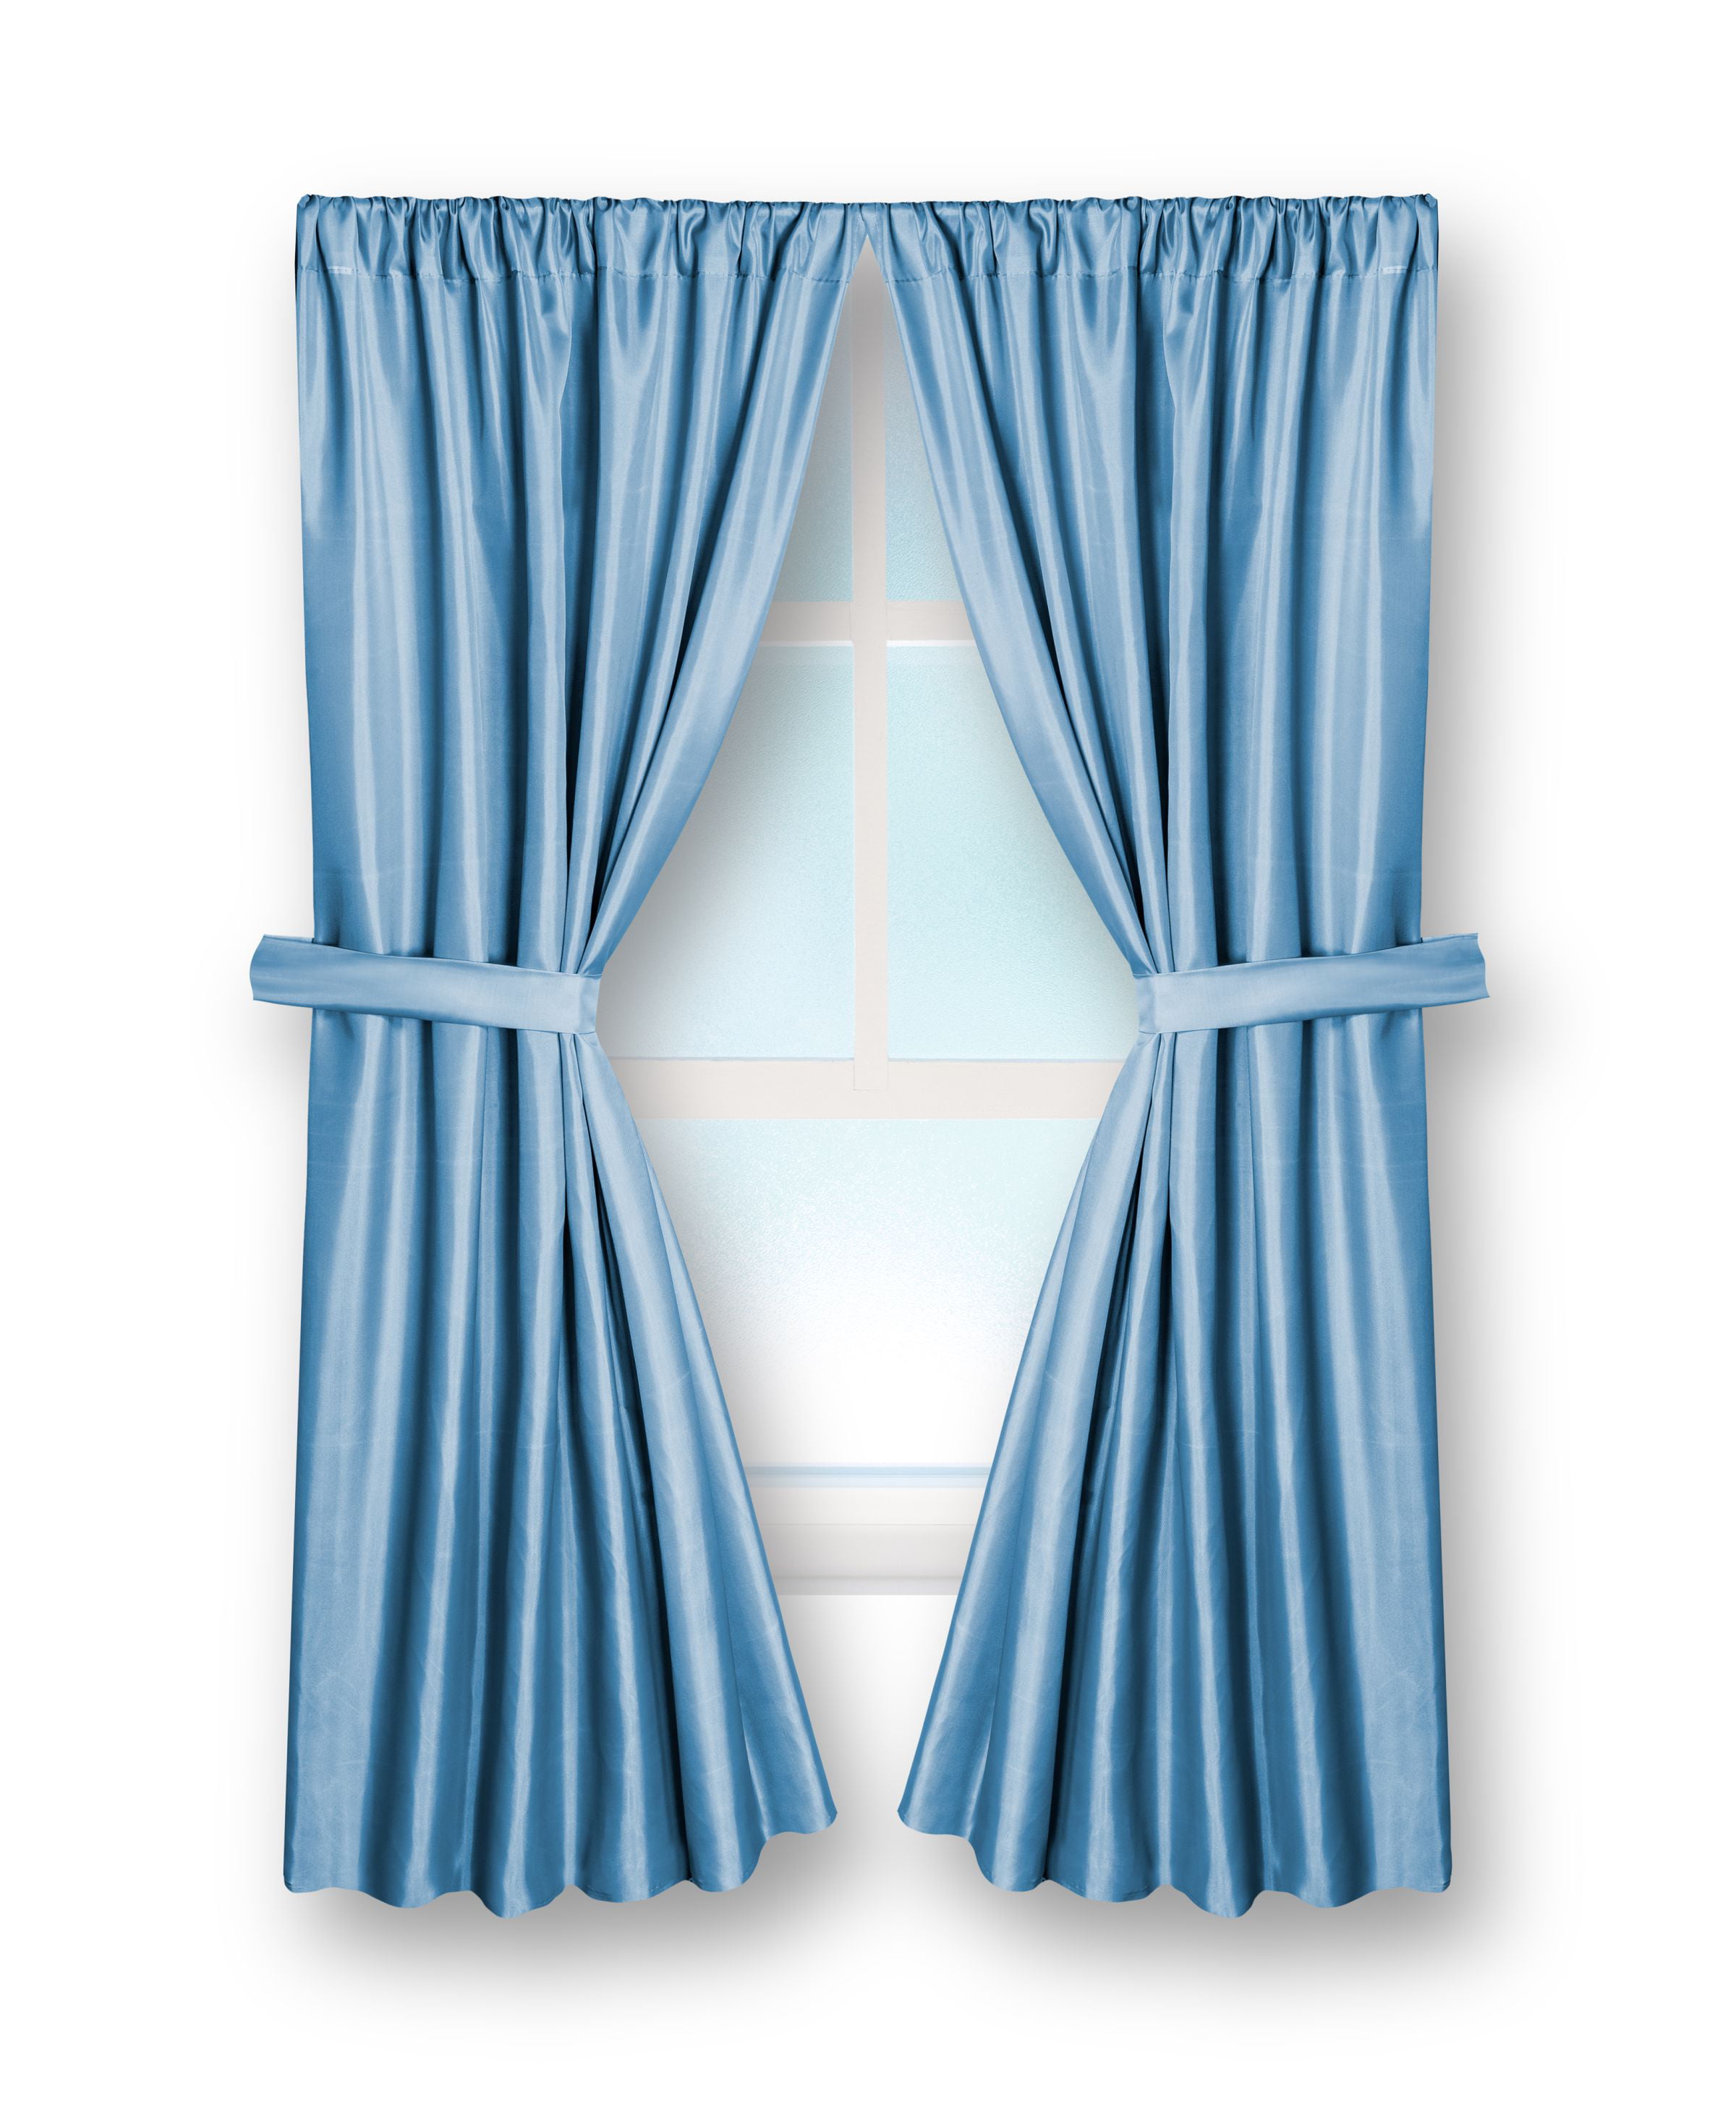 All 100+ Images pictures of curtains with tiebacks Full HD, 2k, 4k